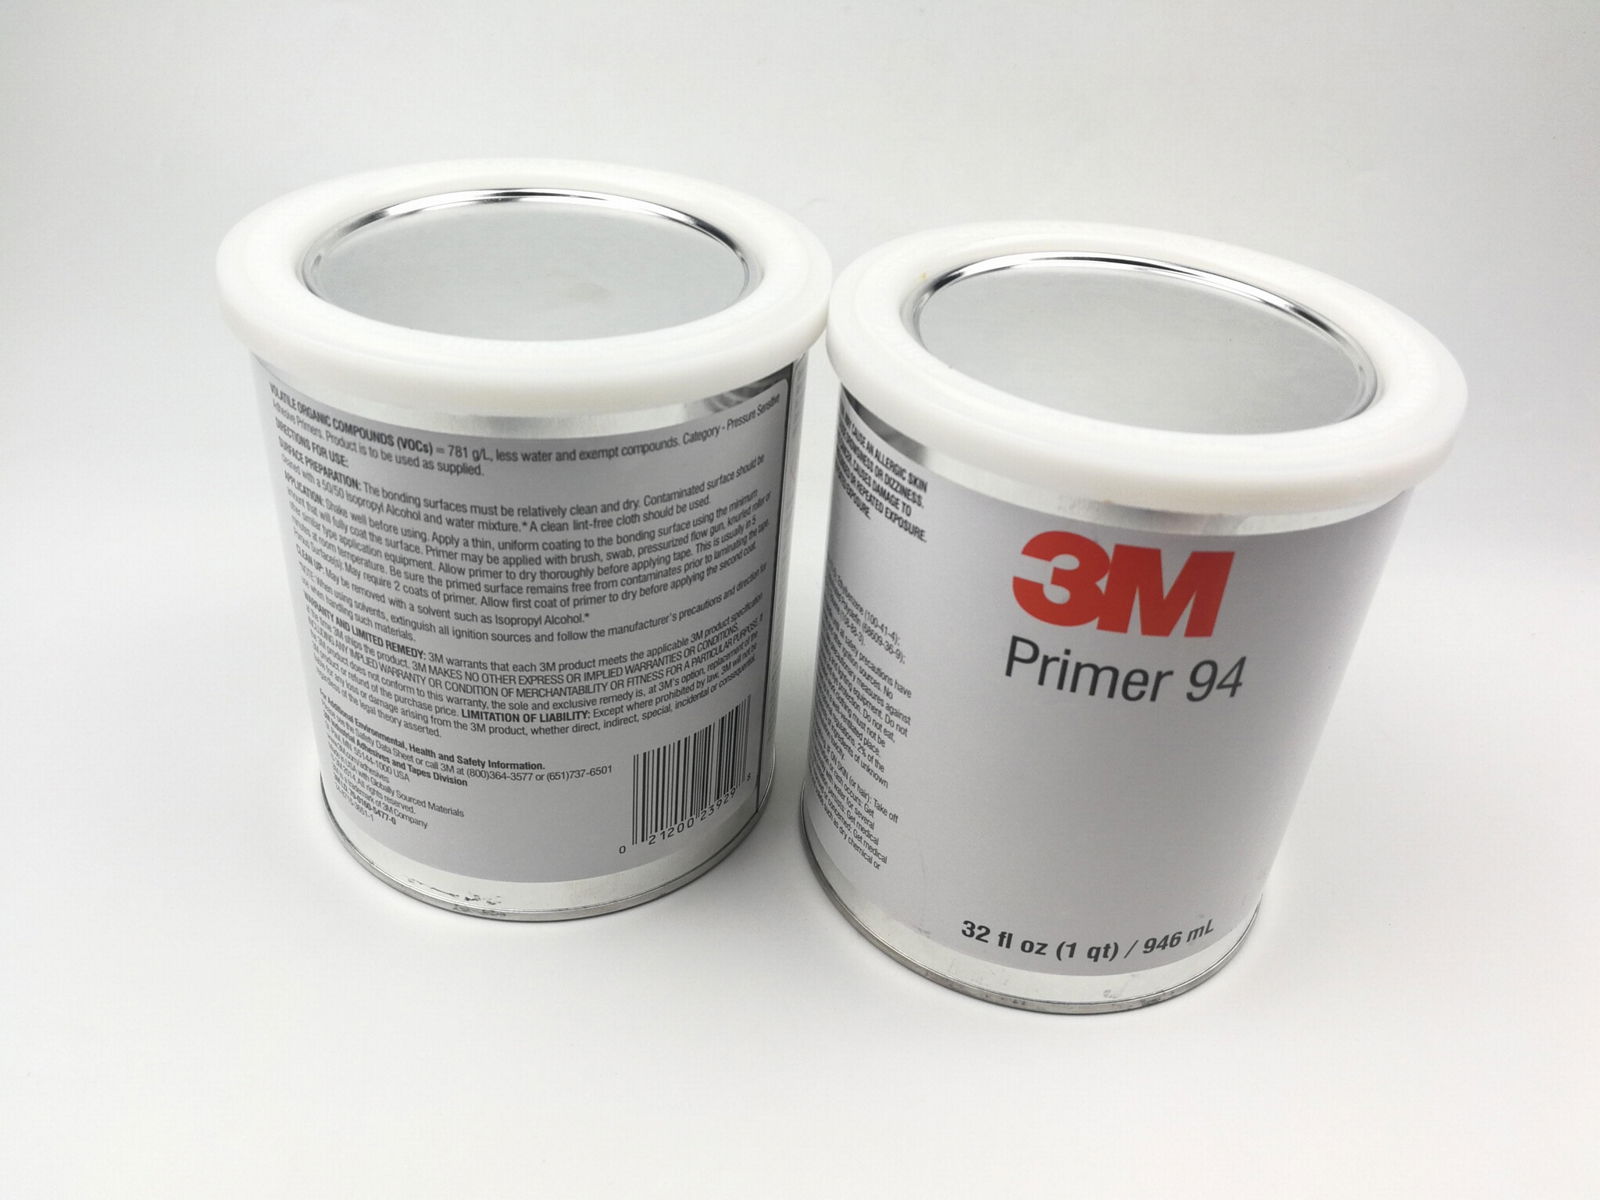 3M Primer 94 be used to promote adhesion of 3M tapes to many surfaces